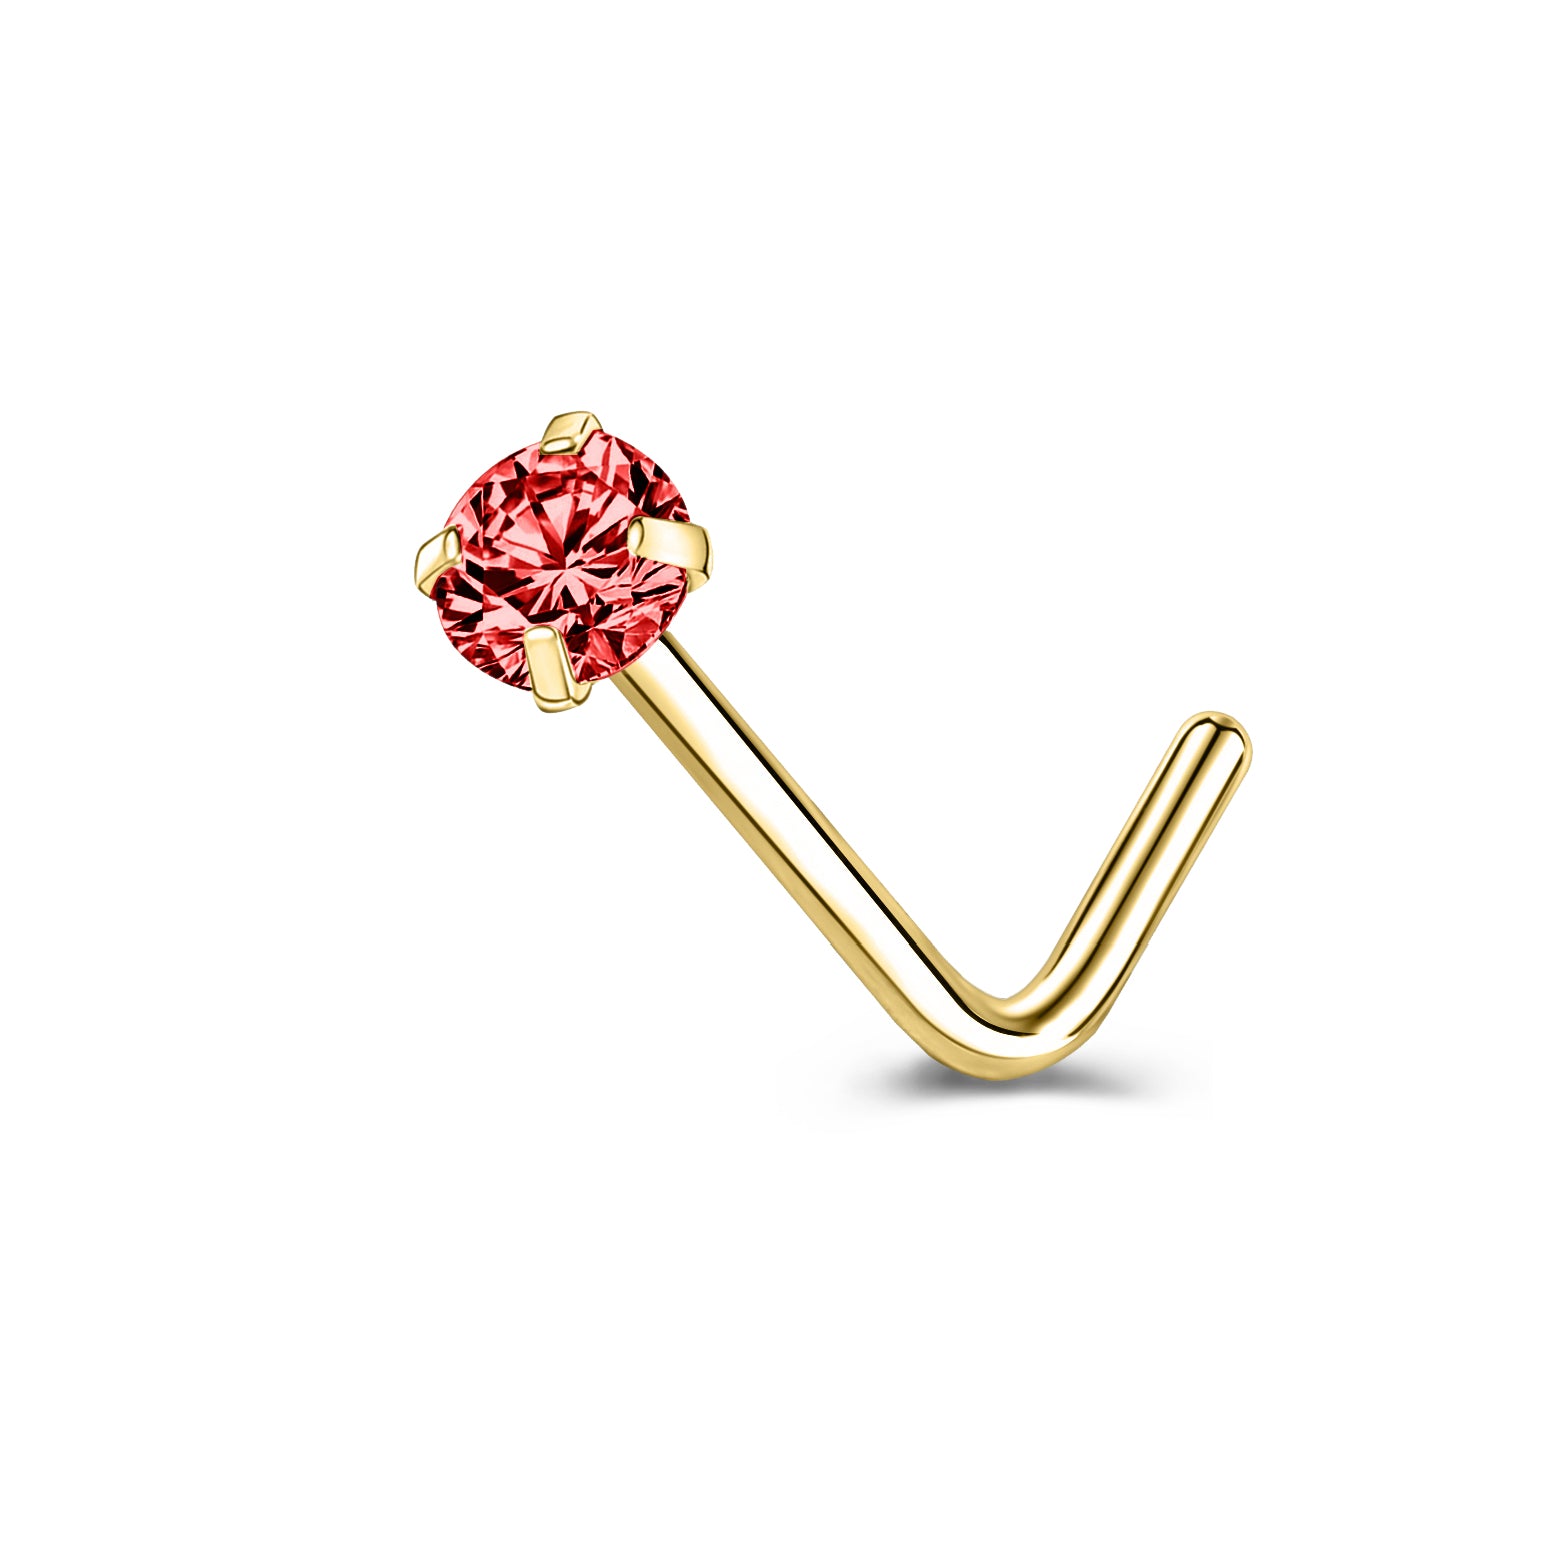 6 Pcs/Set 20G Red Zircon Nose Studs Piercing L-Shape Nose Rings Gold Plated Nostril Piercing